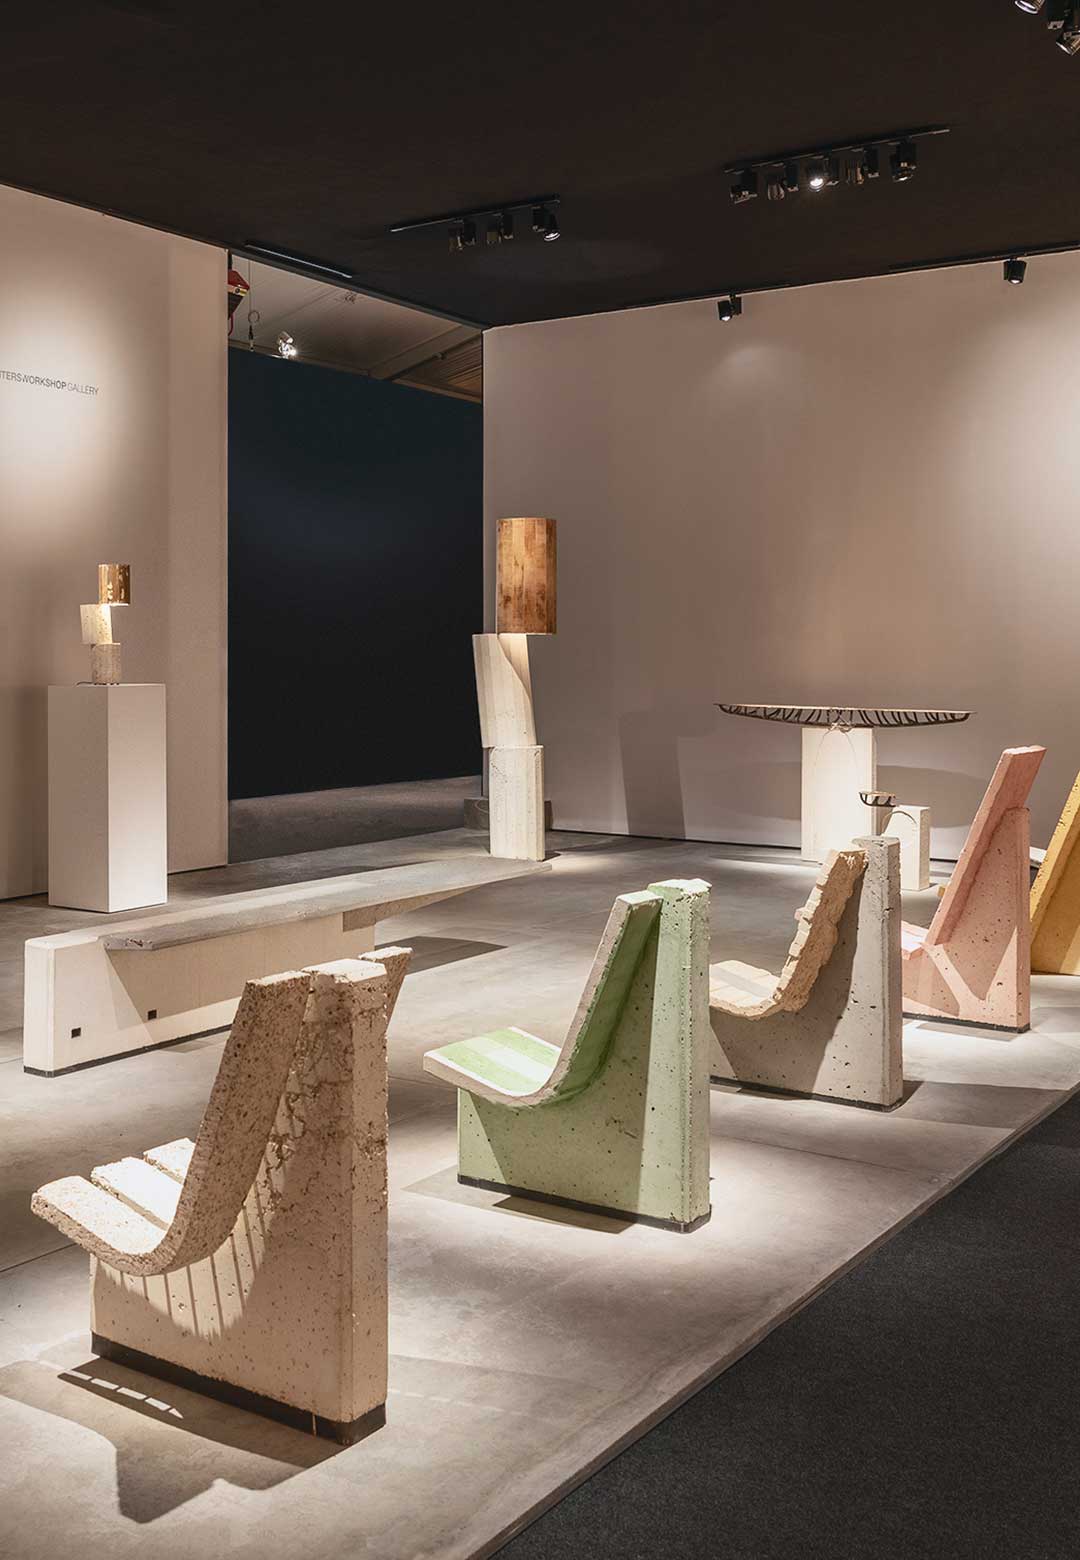 Carpenters Workshop Gallery showcases Martin Laforet's intriguing aesthetic